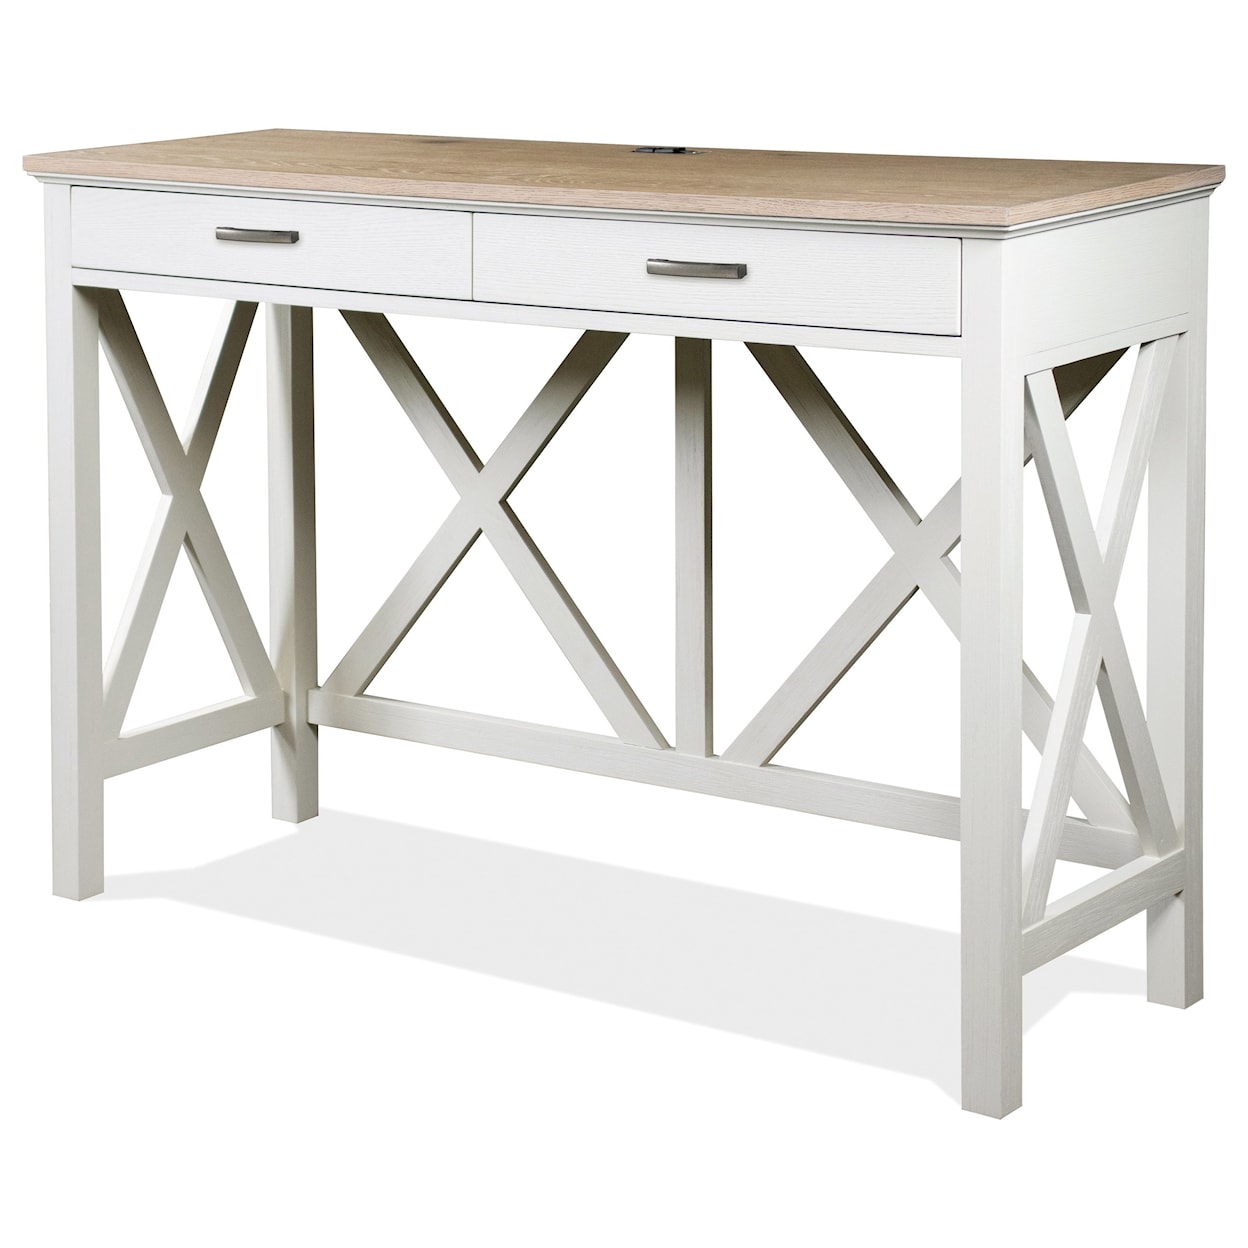 Riverside Furniture Osborne Console Table with Stools